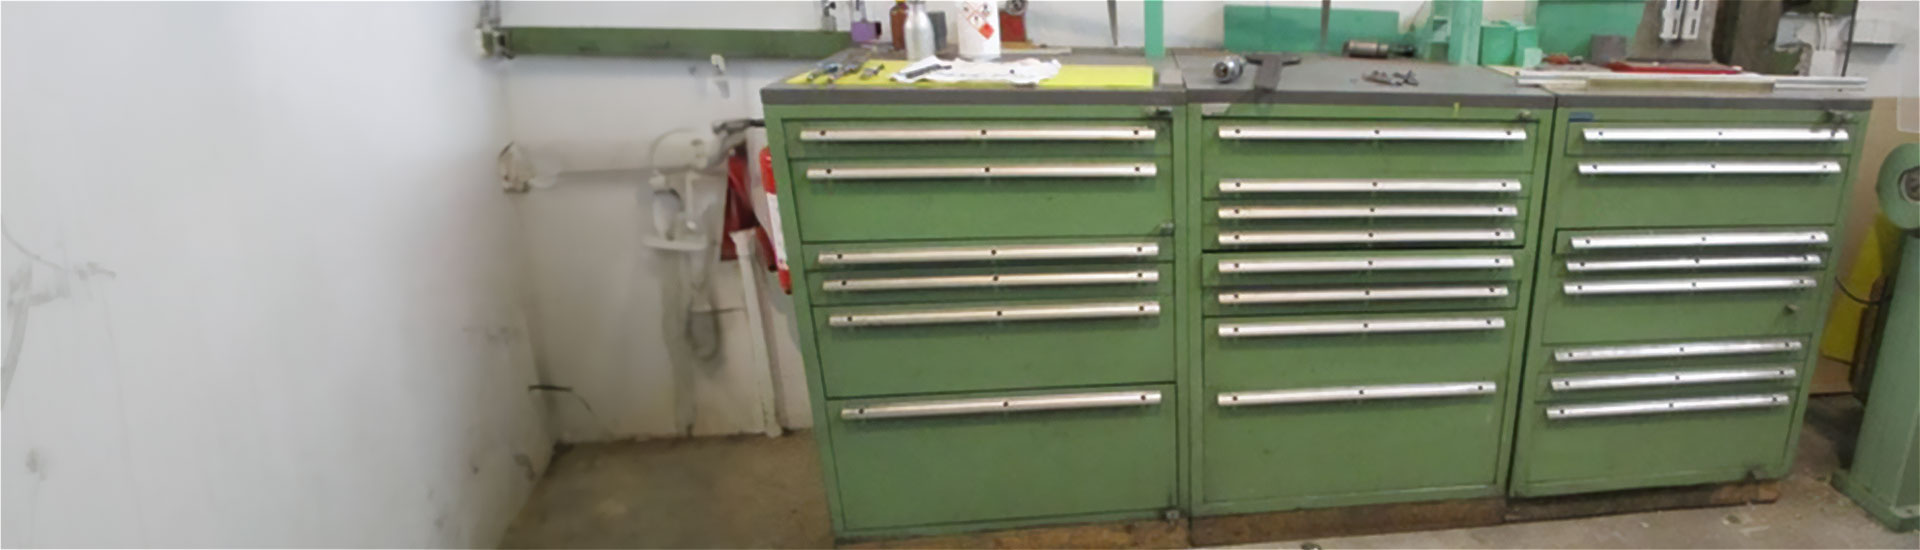 Olive Tool Cabinet Wraps